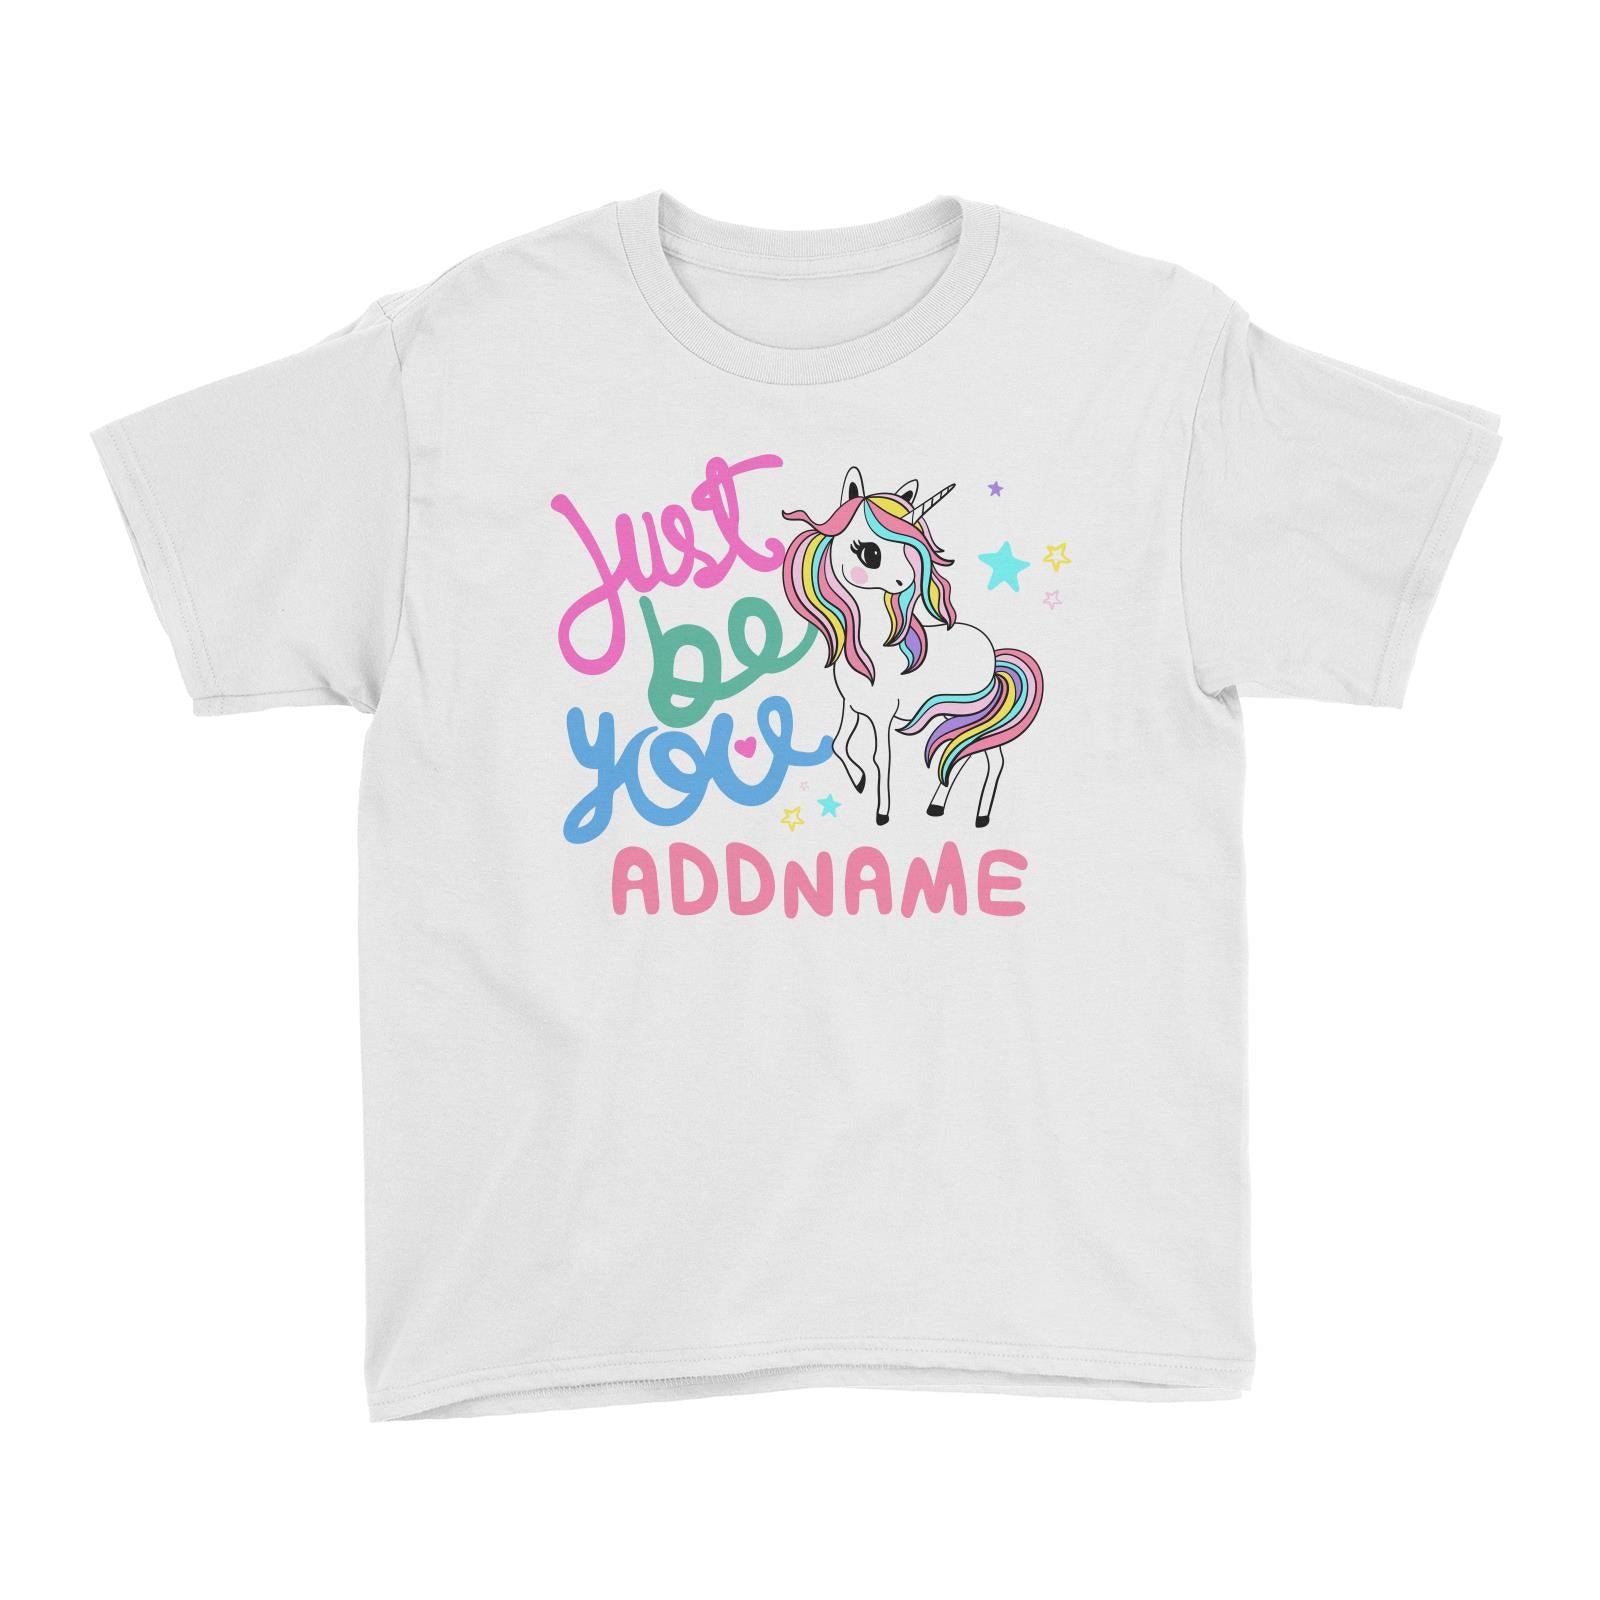 Children's Day Gift Series Just Be You Cute Unicorn Addname Kid's T-Shirt